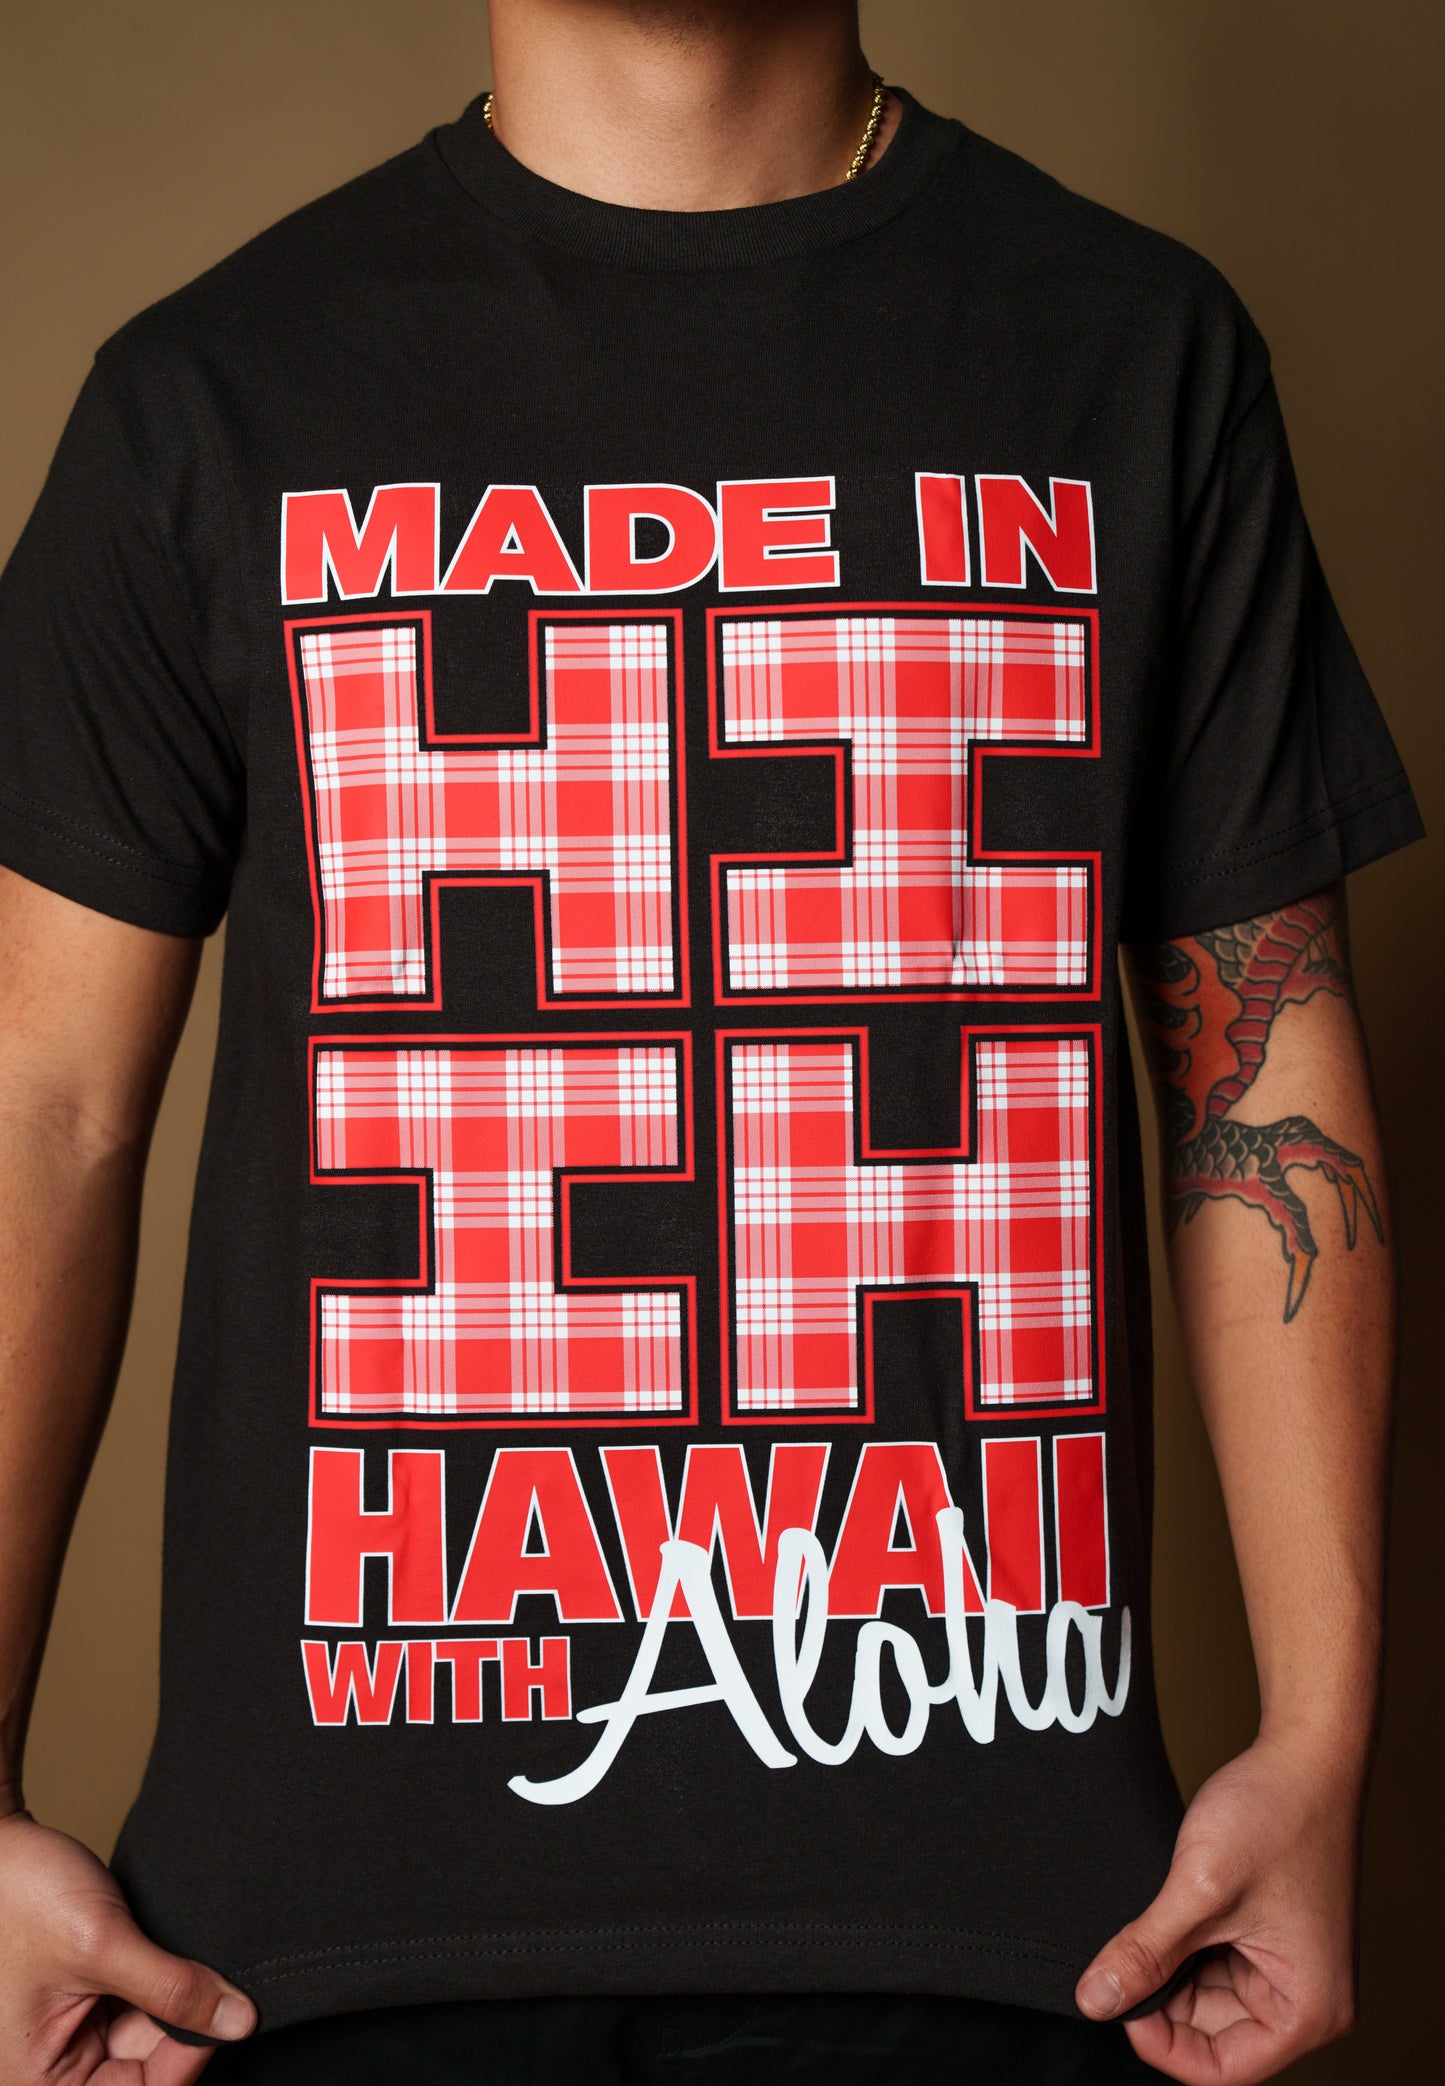 Made in Hawaii Black T-Shirt - Black/Red